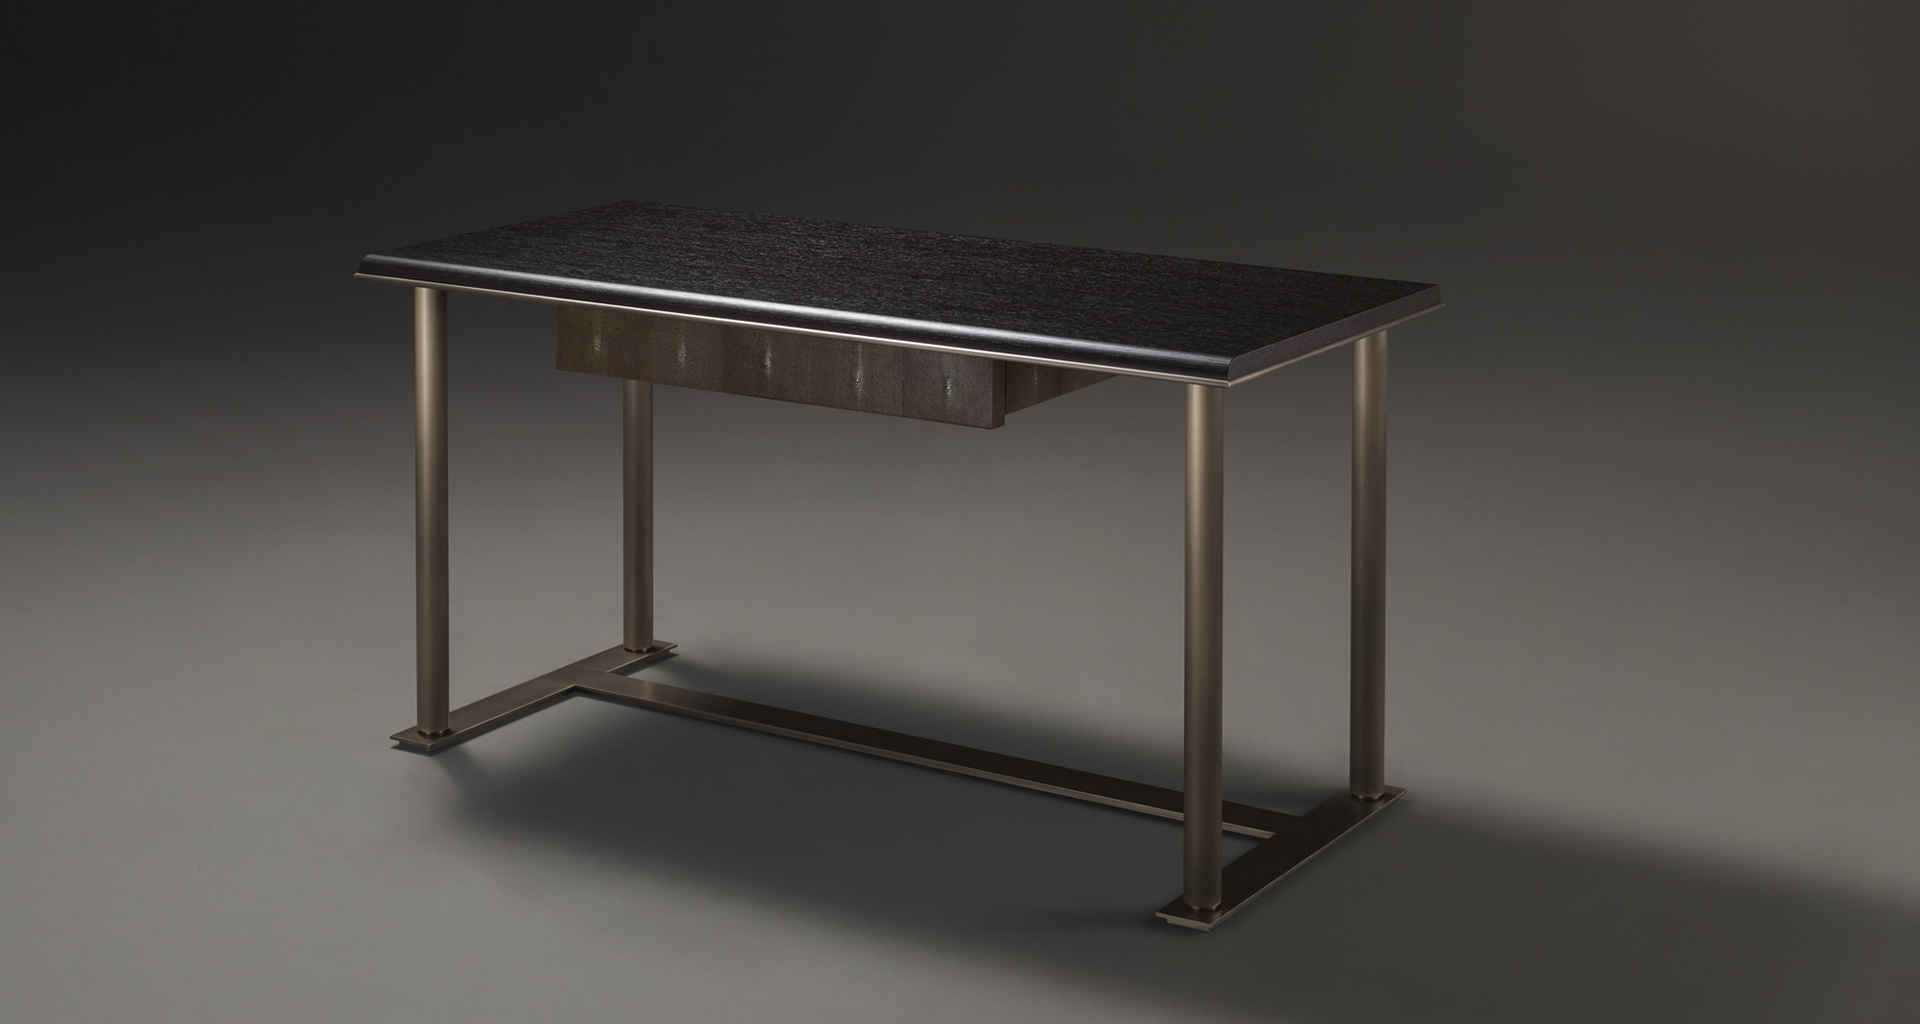 Galadriel is an essential writing desk with bronze structure and wooden tops and drawers from the Promemoria's catalogue | Promemoria